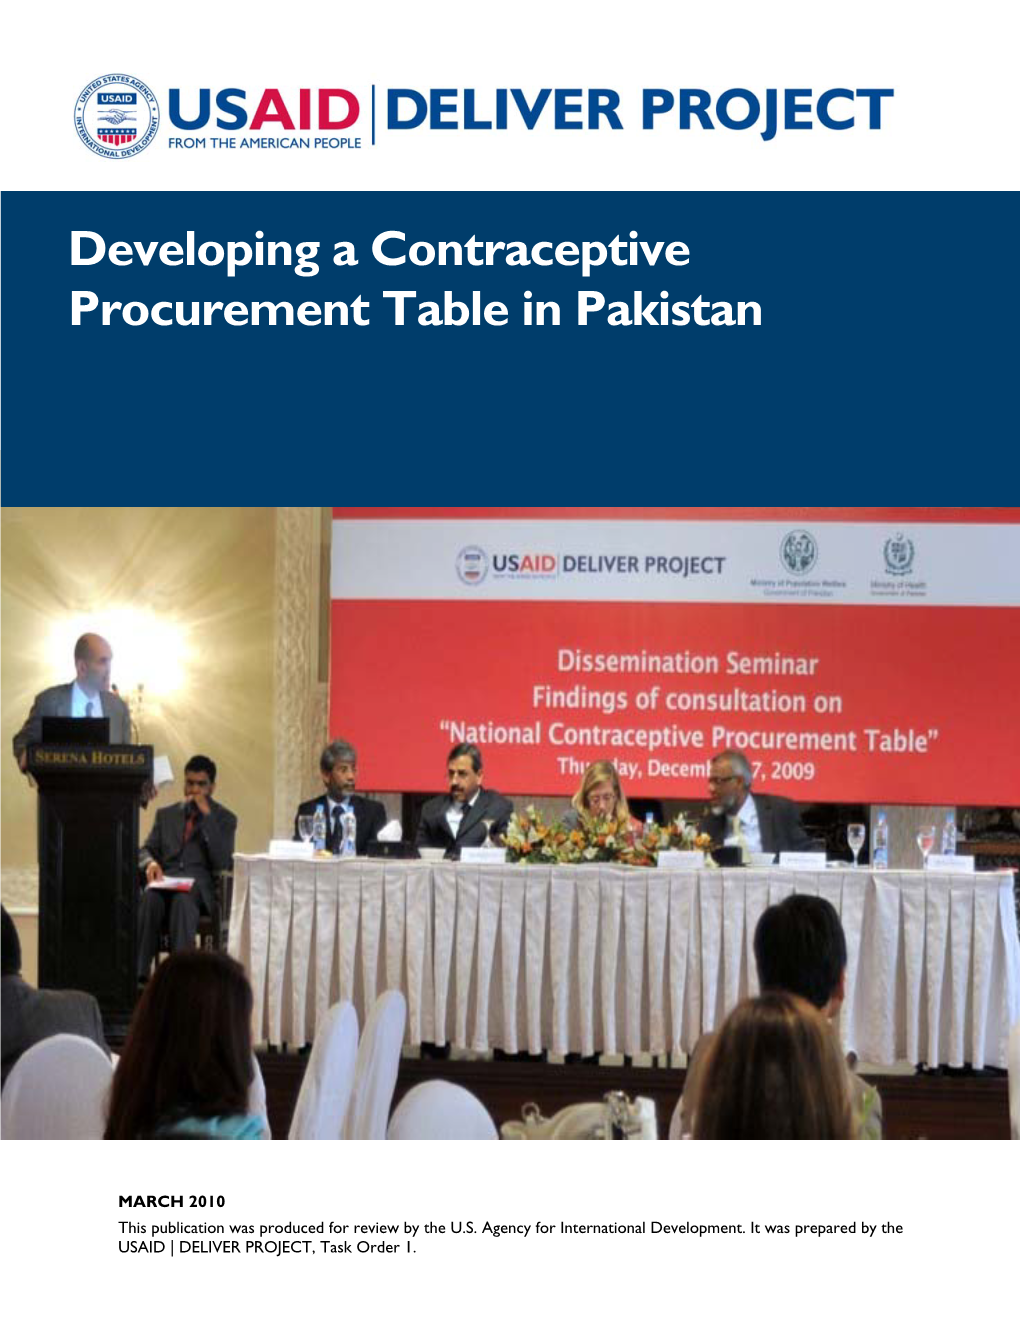 Developing a Contraceptive Procurement Table in Pakistan